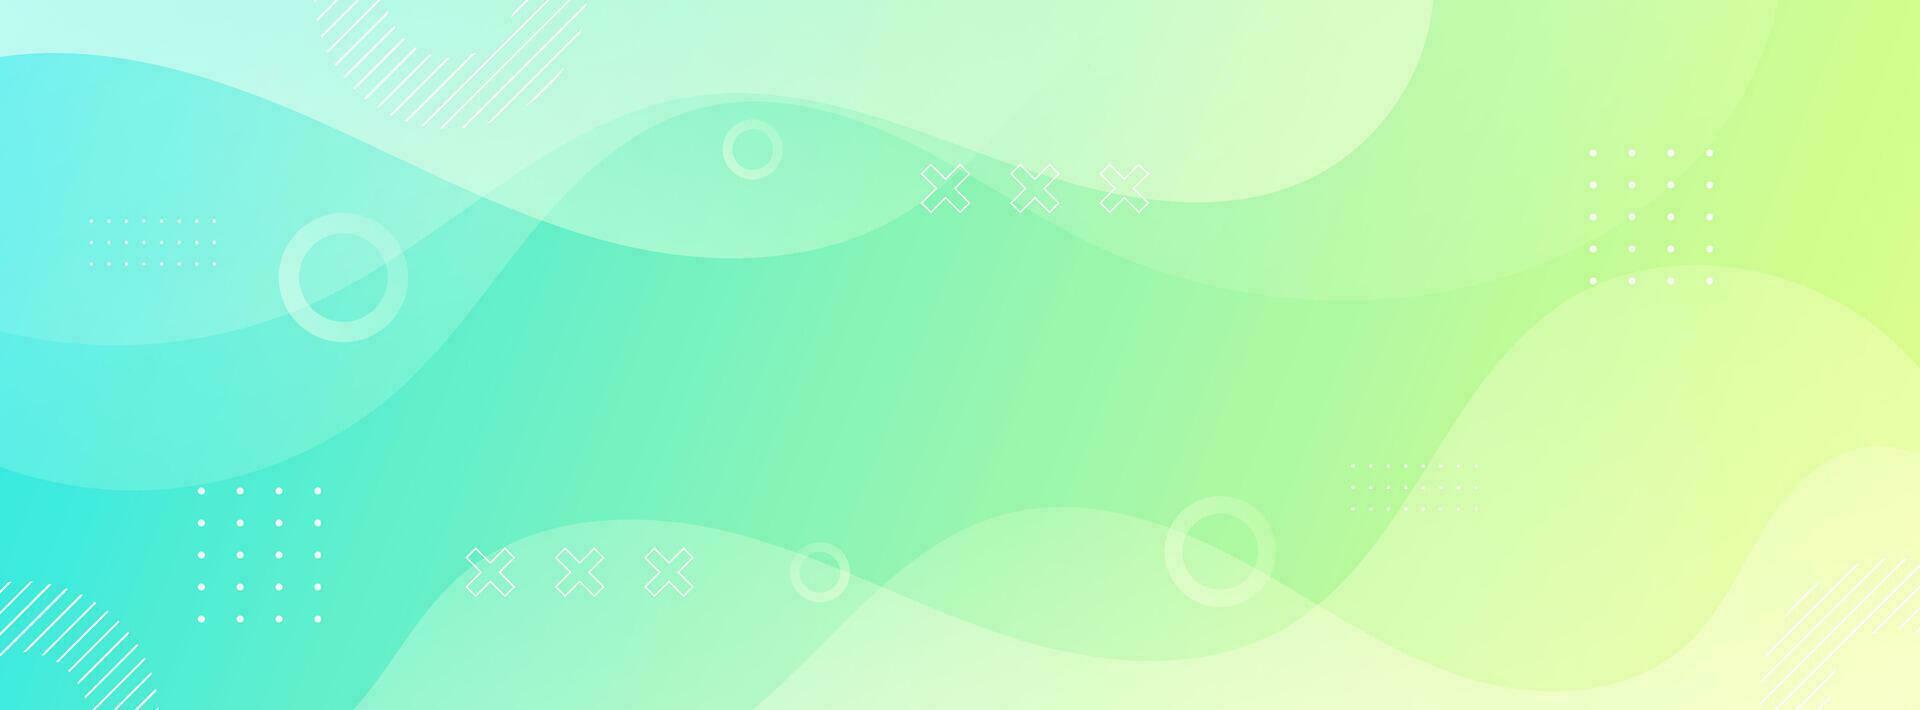 banner background. green and yellow. wave. eps 10 vector